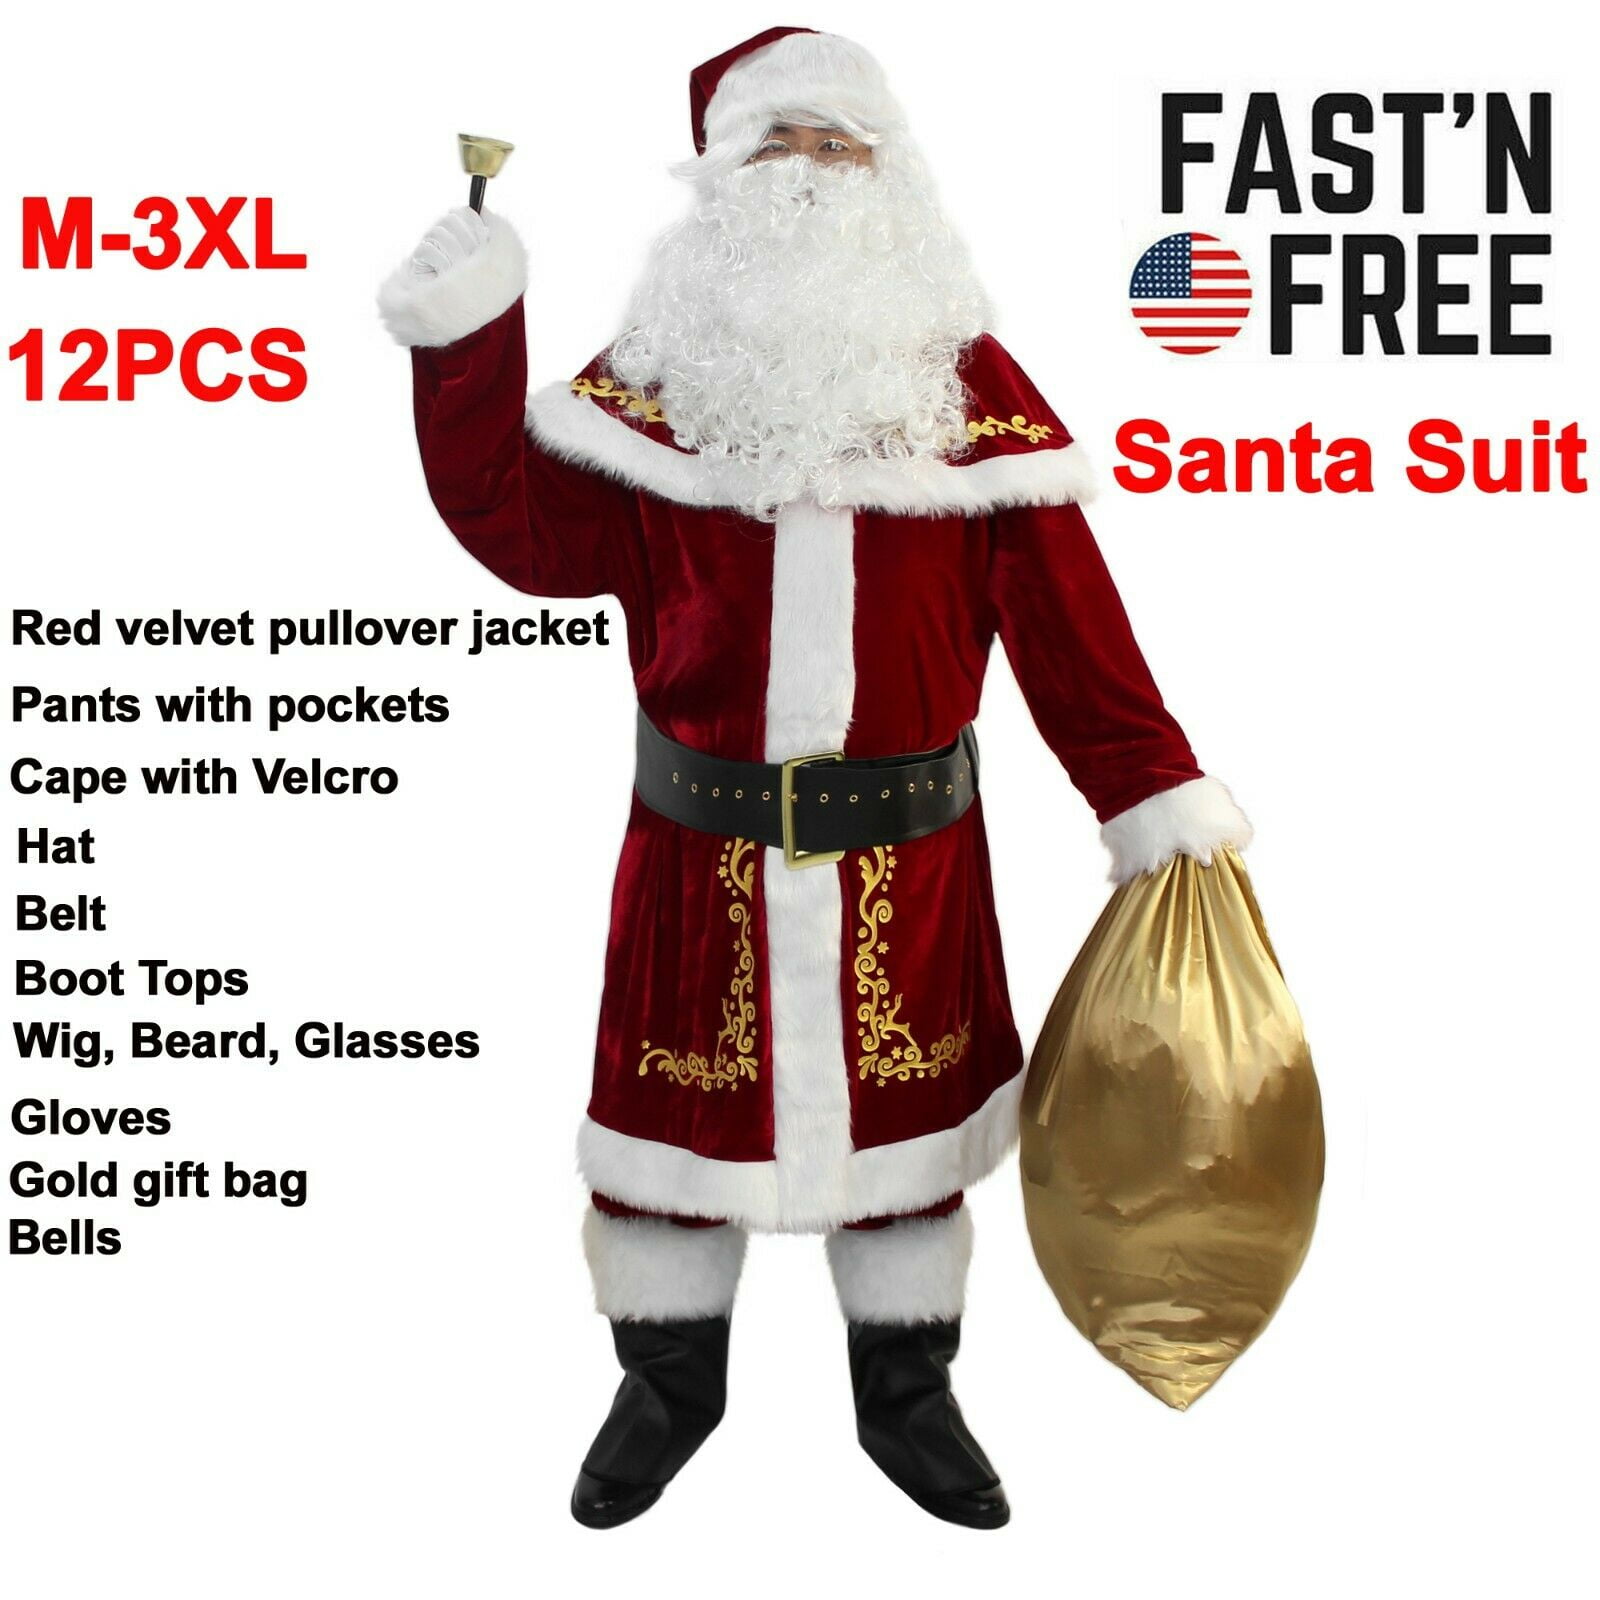 100 Premium Quality Father Christmas Santa Hat Fancy Dress Party Costume Supply 